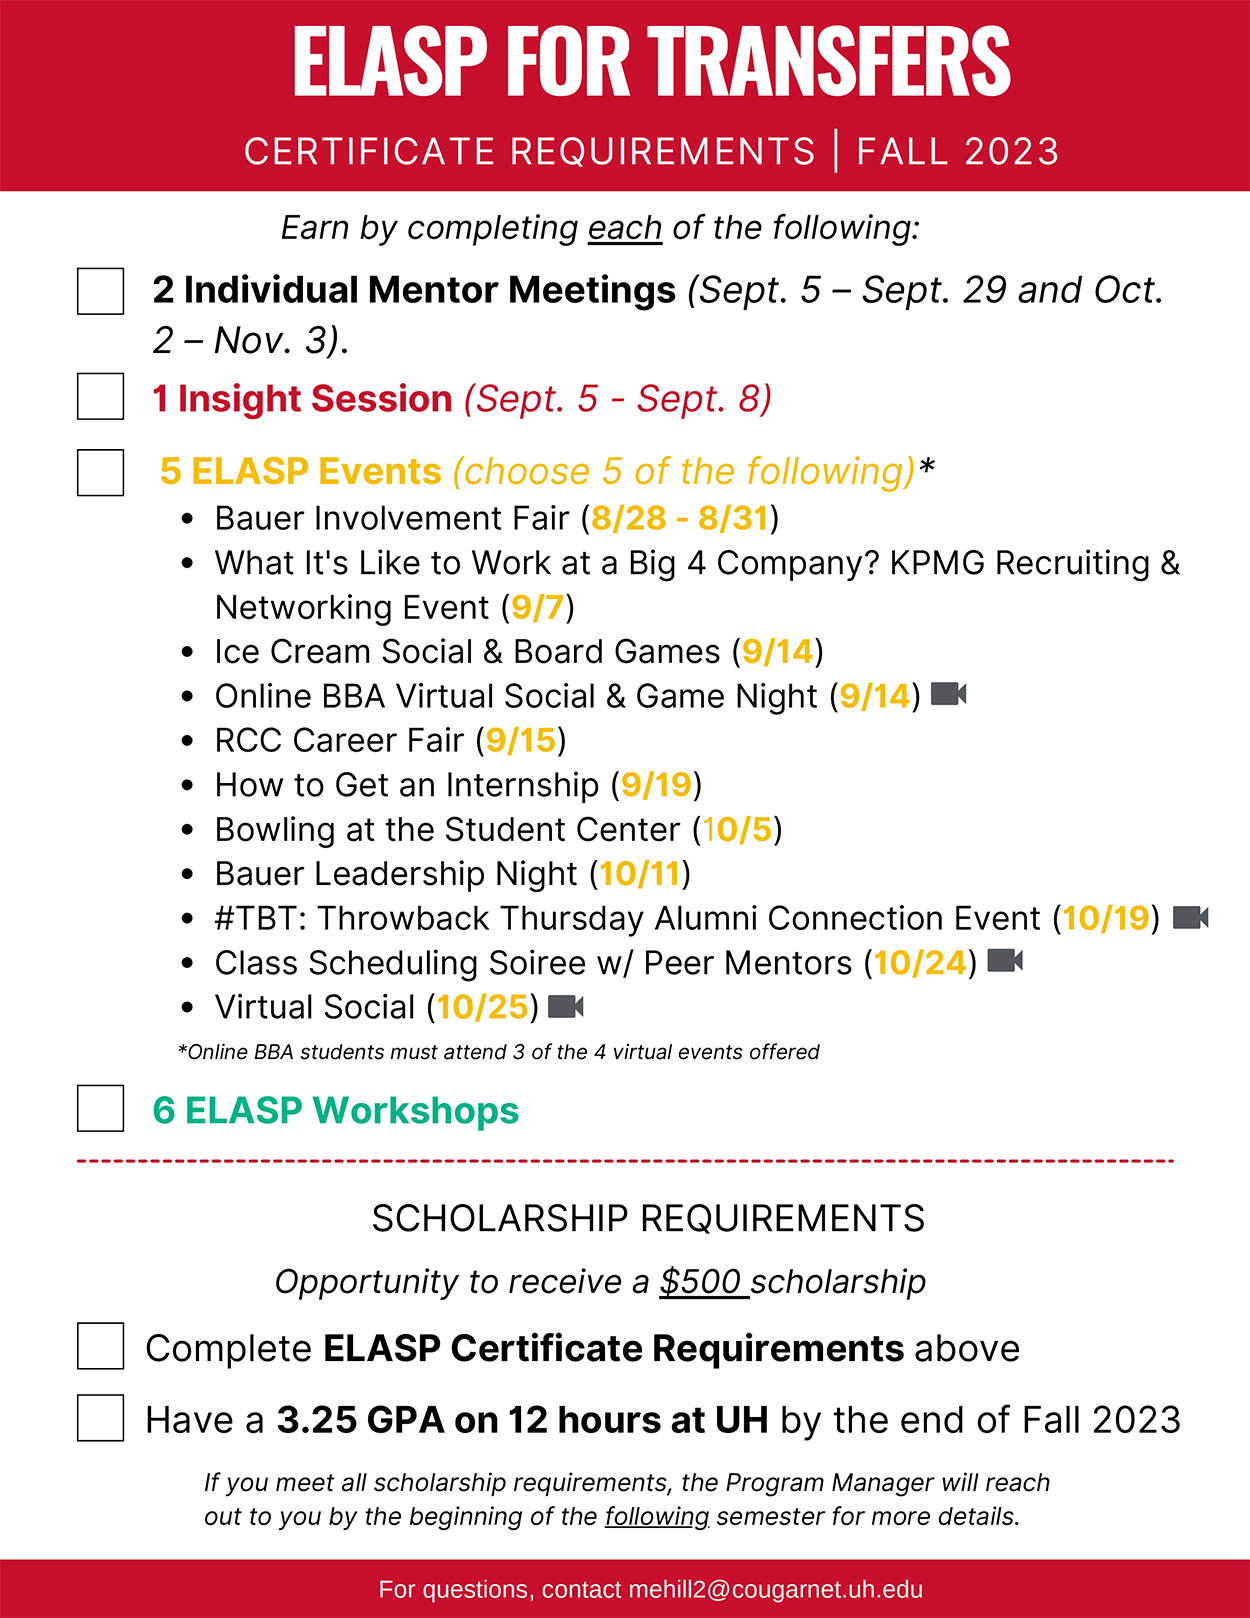 ELASP for Transfers Certificate and Scholarship Requirements